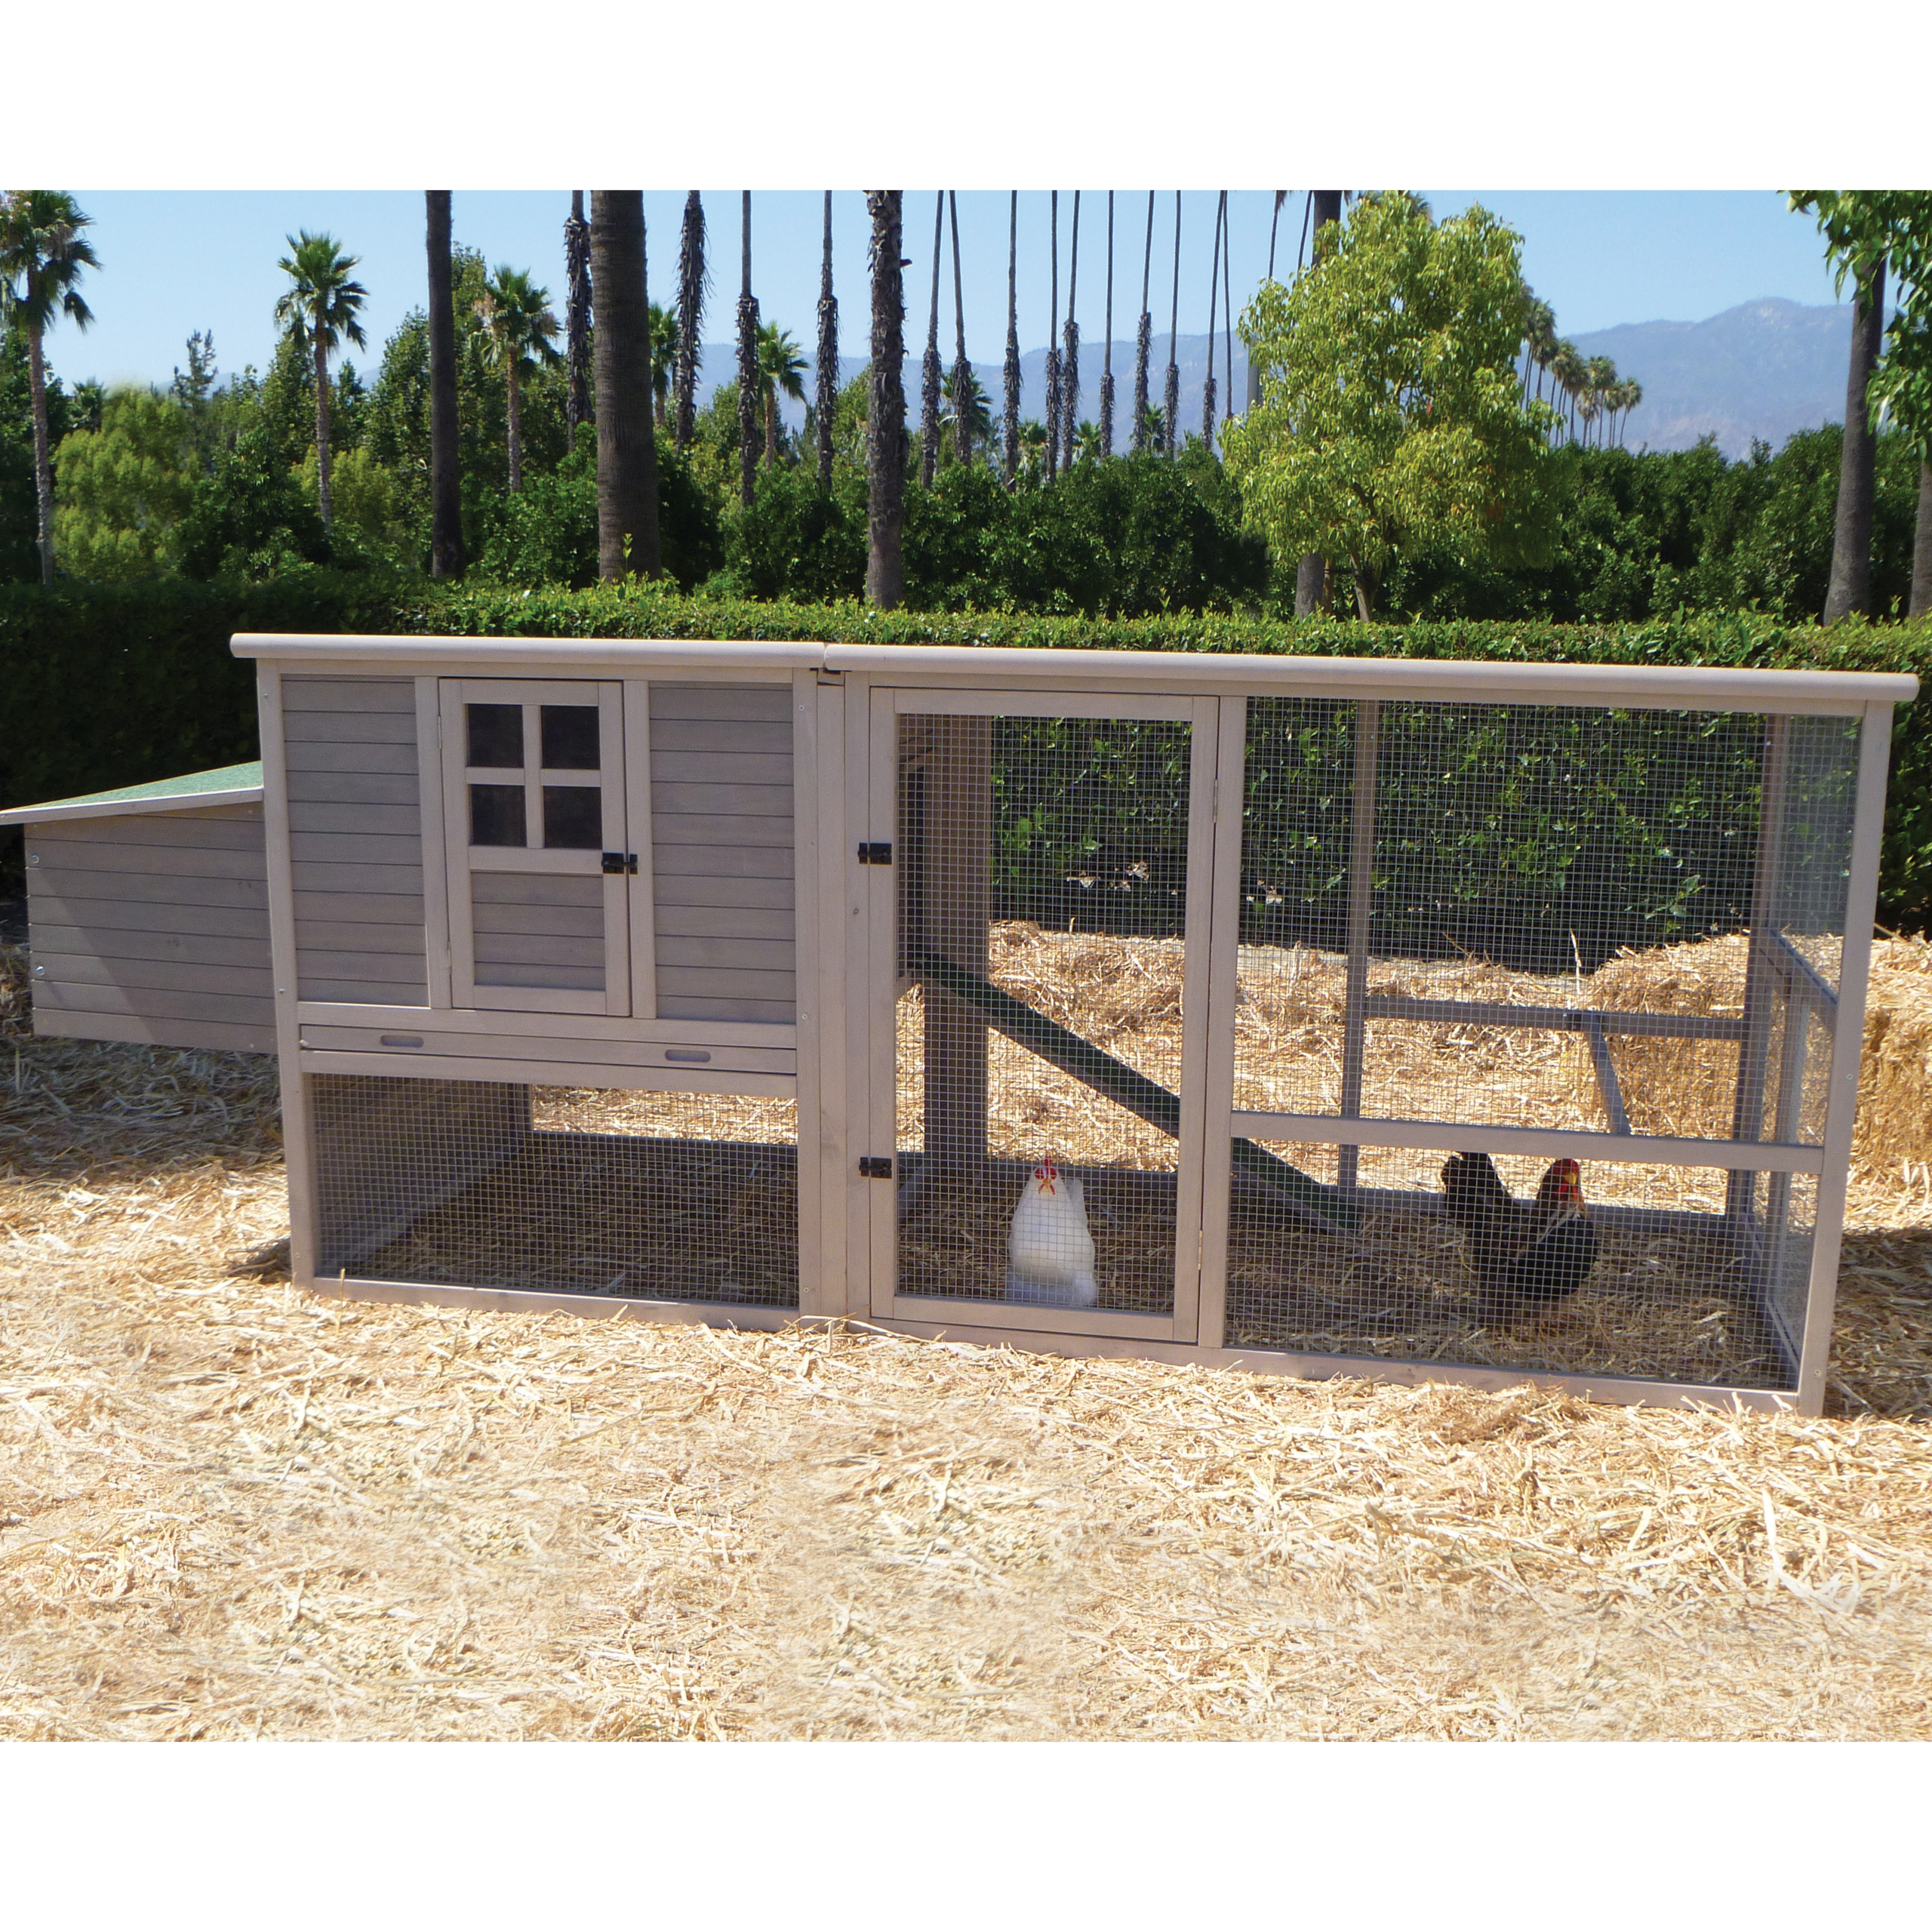 Chicken coops for sale 4